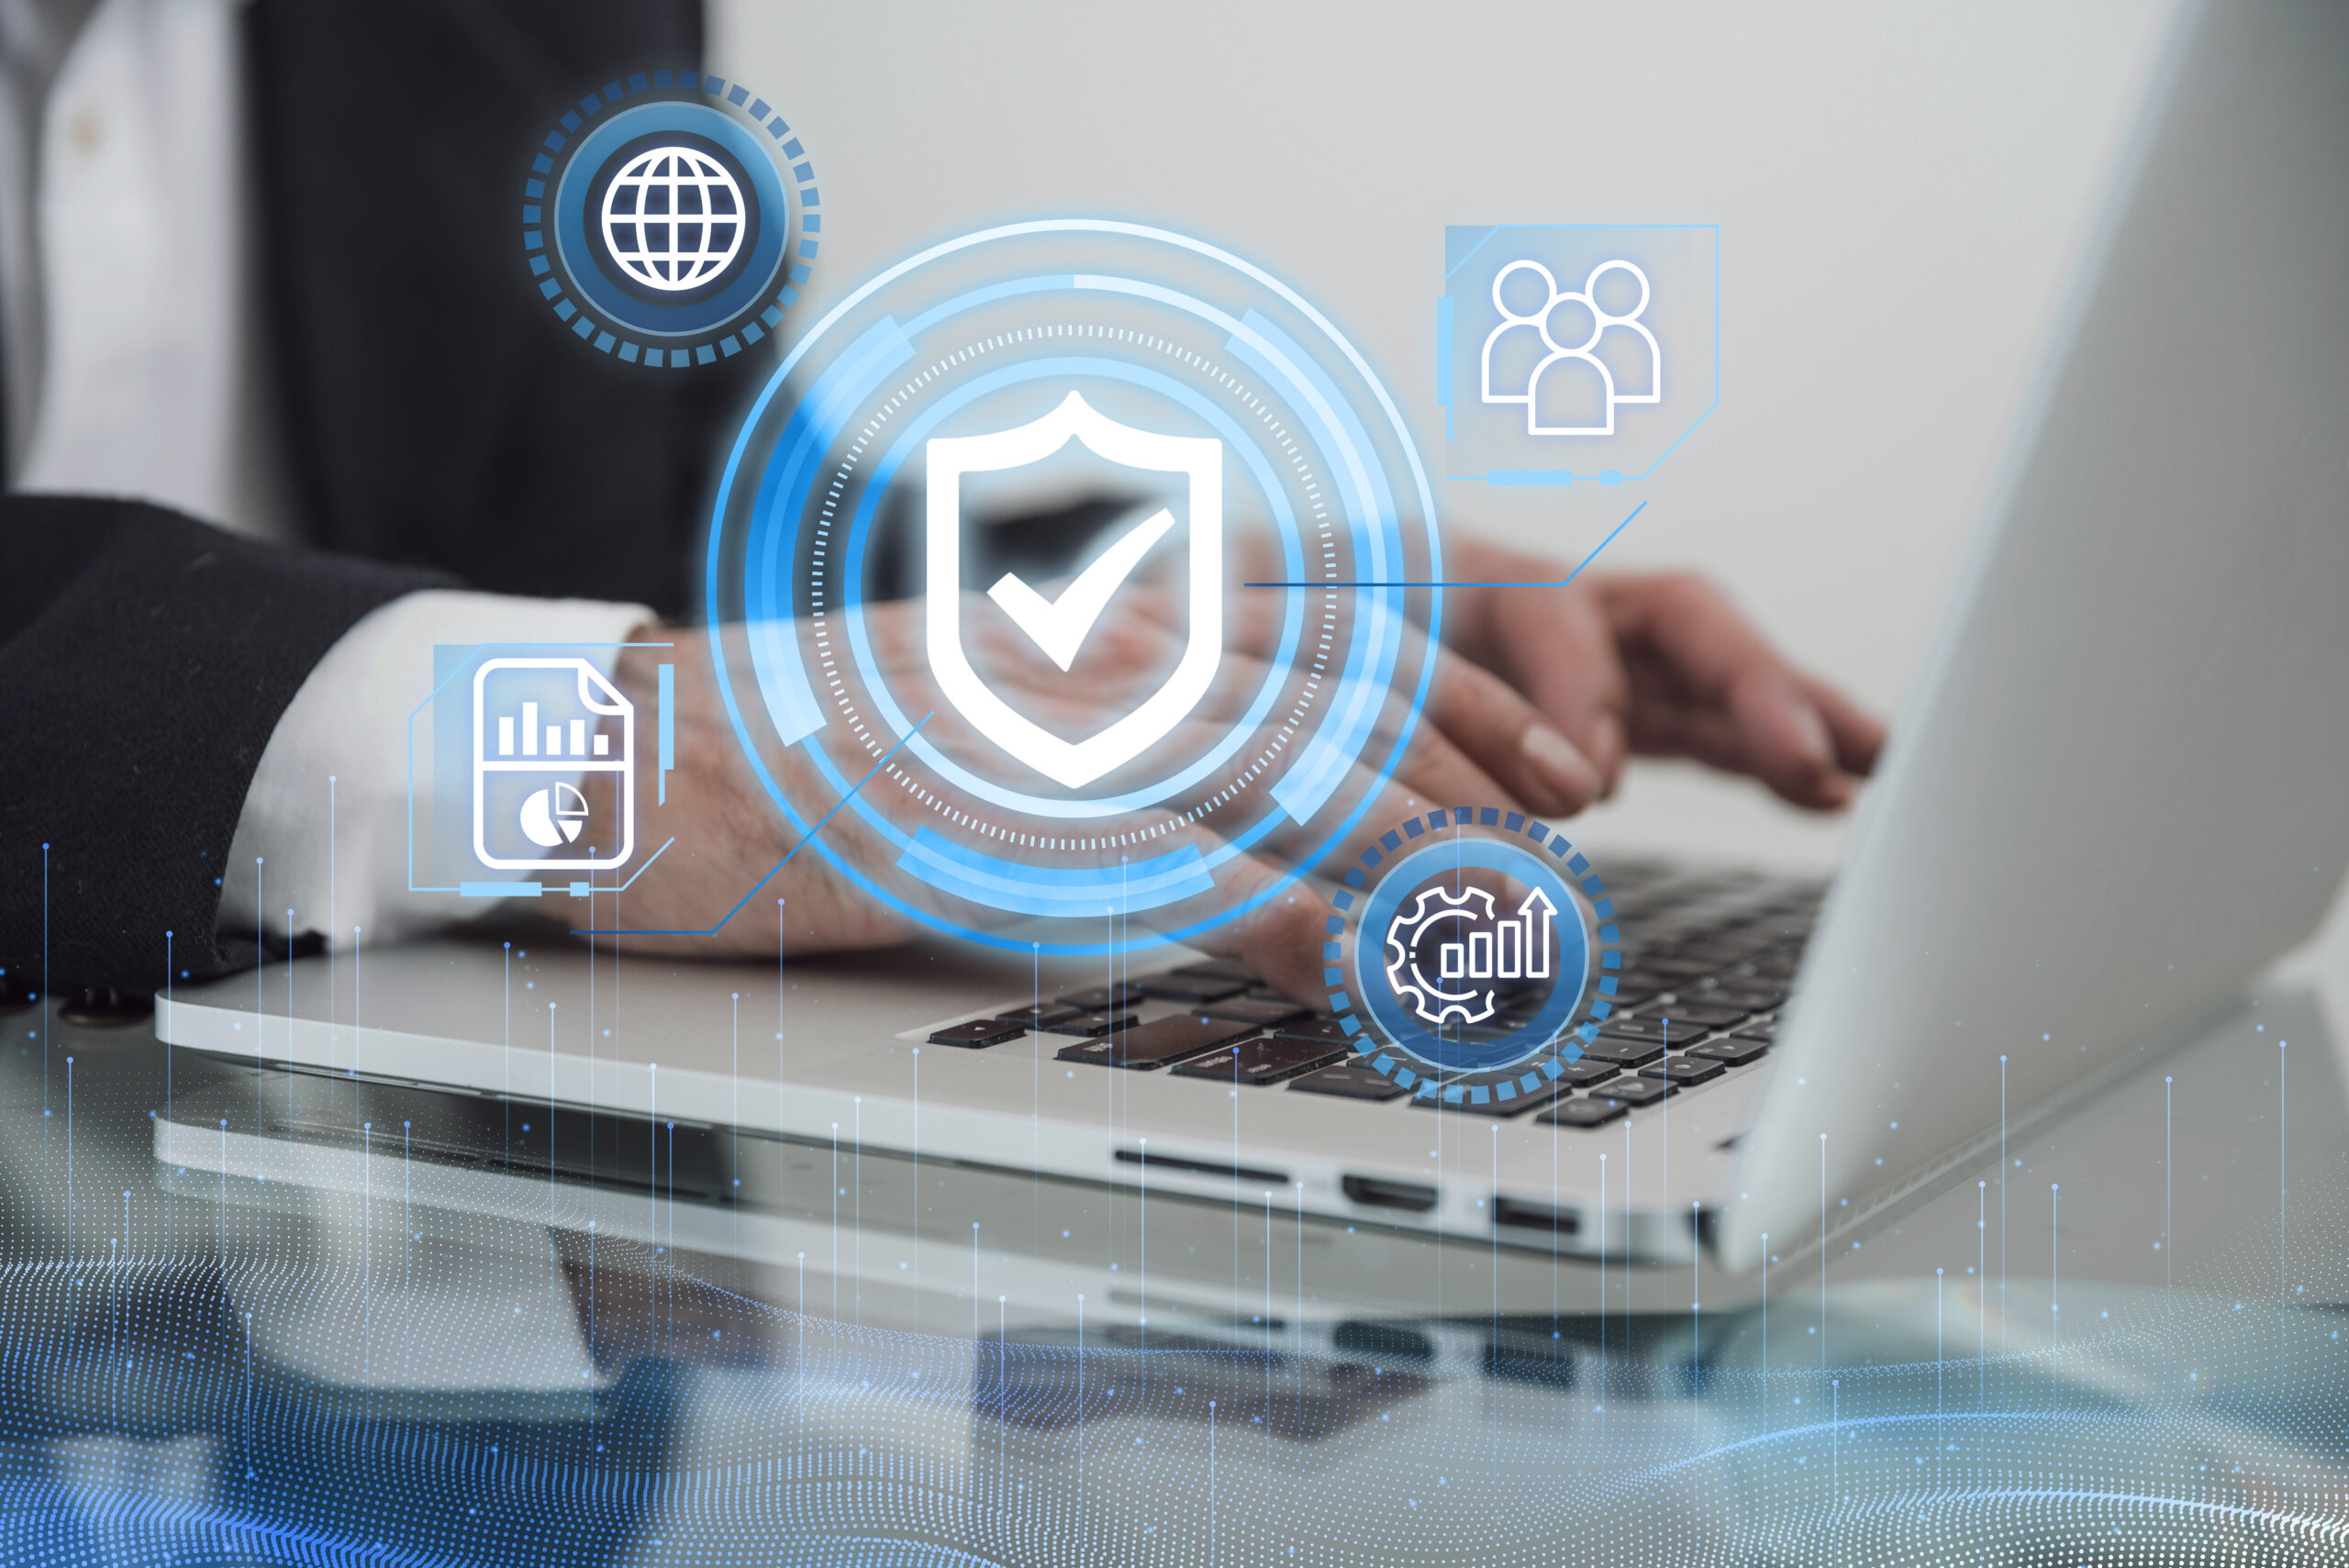 Cybersecurity Tips Small Businesses Digital Assets Security Audits Strong Password Policies Cybersecurity Awareness Training Firewall Software Updates Data Backup Strategy Role-Based Access Control